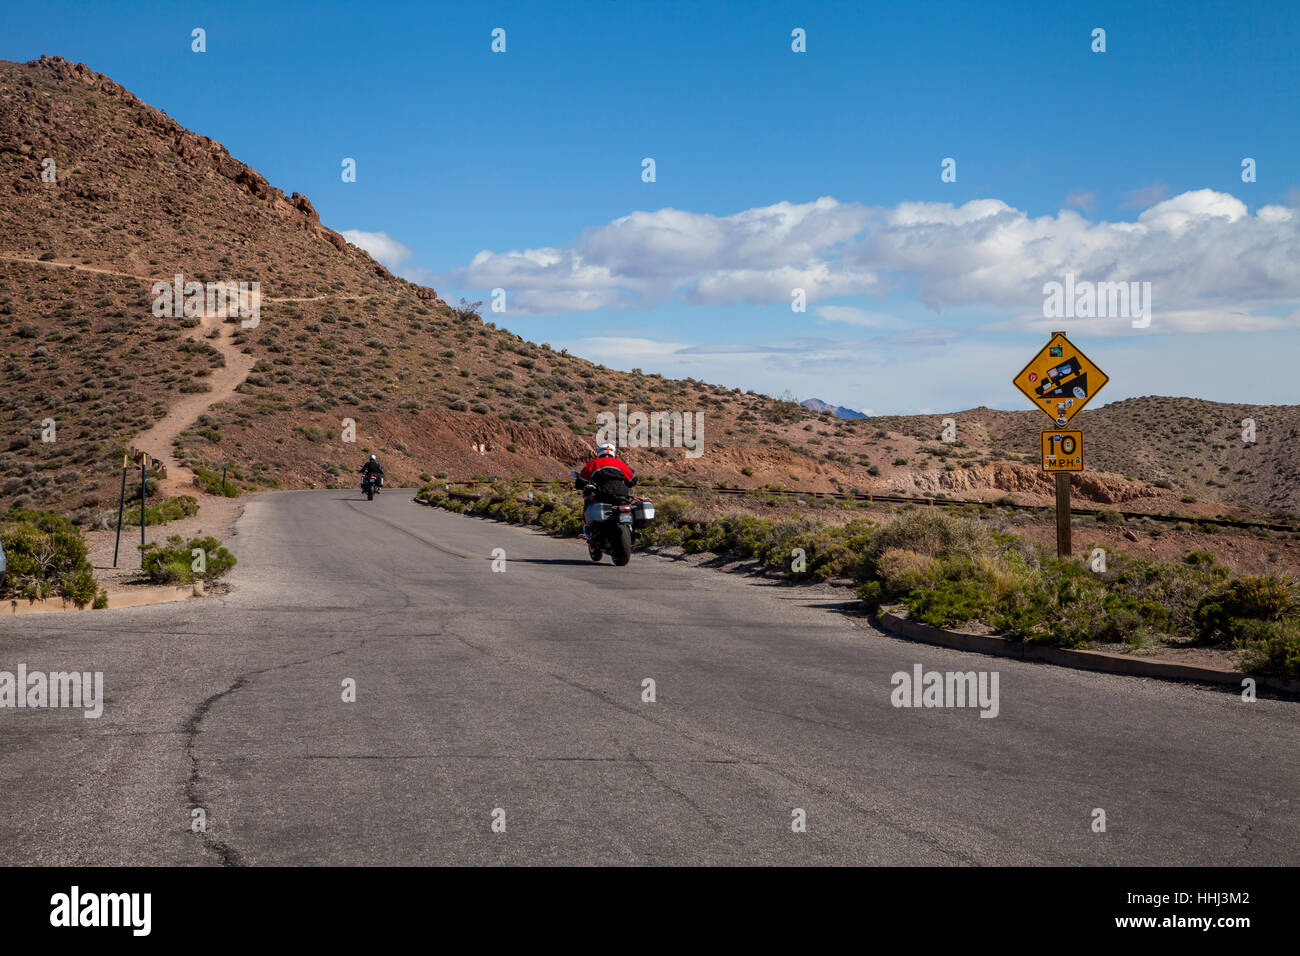 Motorcyclists leaving Dante's View, Death Valley National Park, California, USA Stock Photo